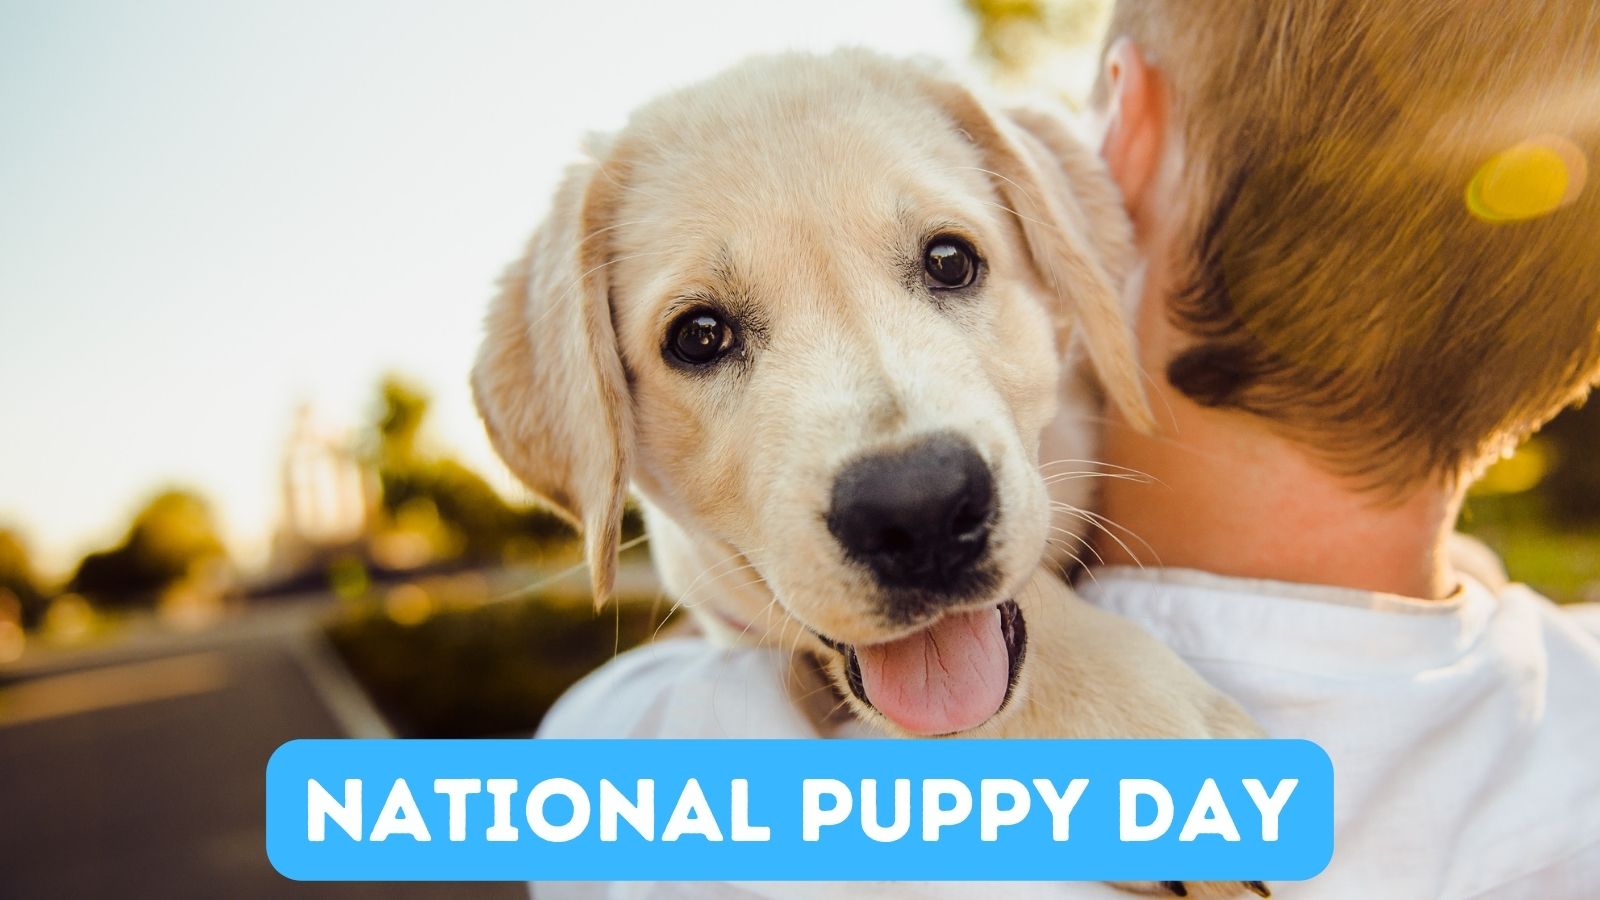 who created national puppy day